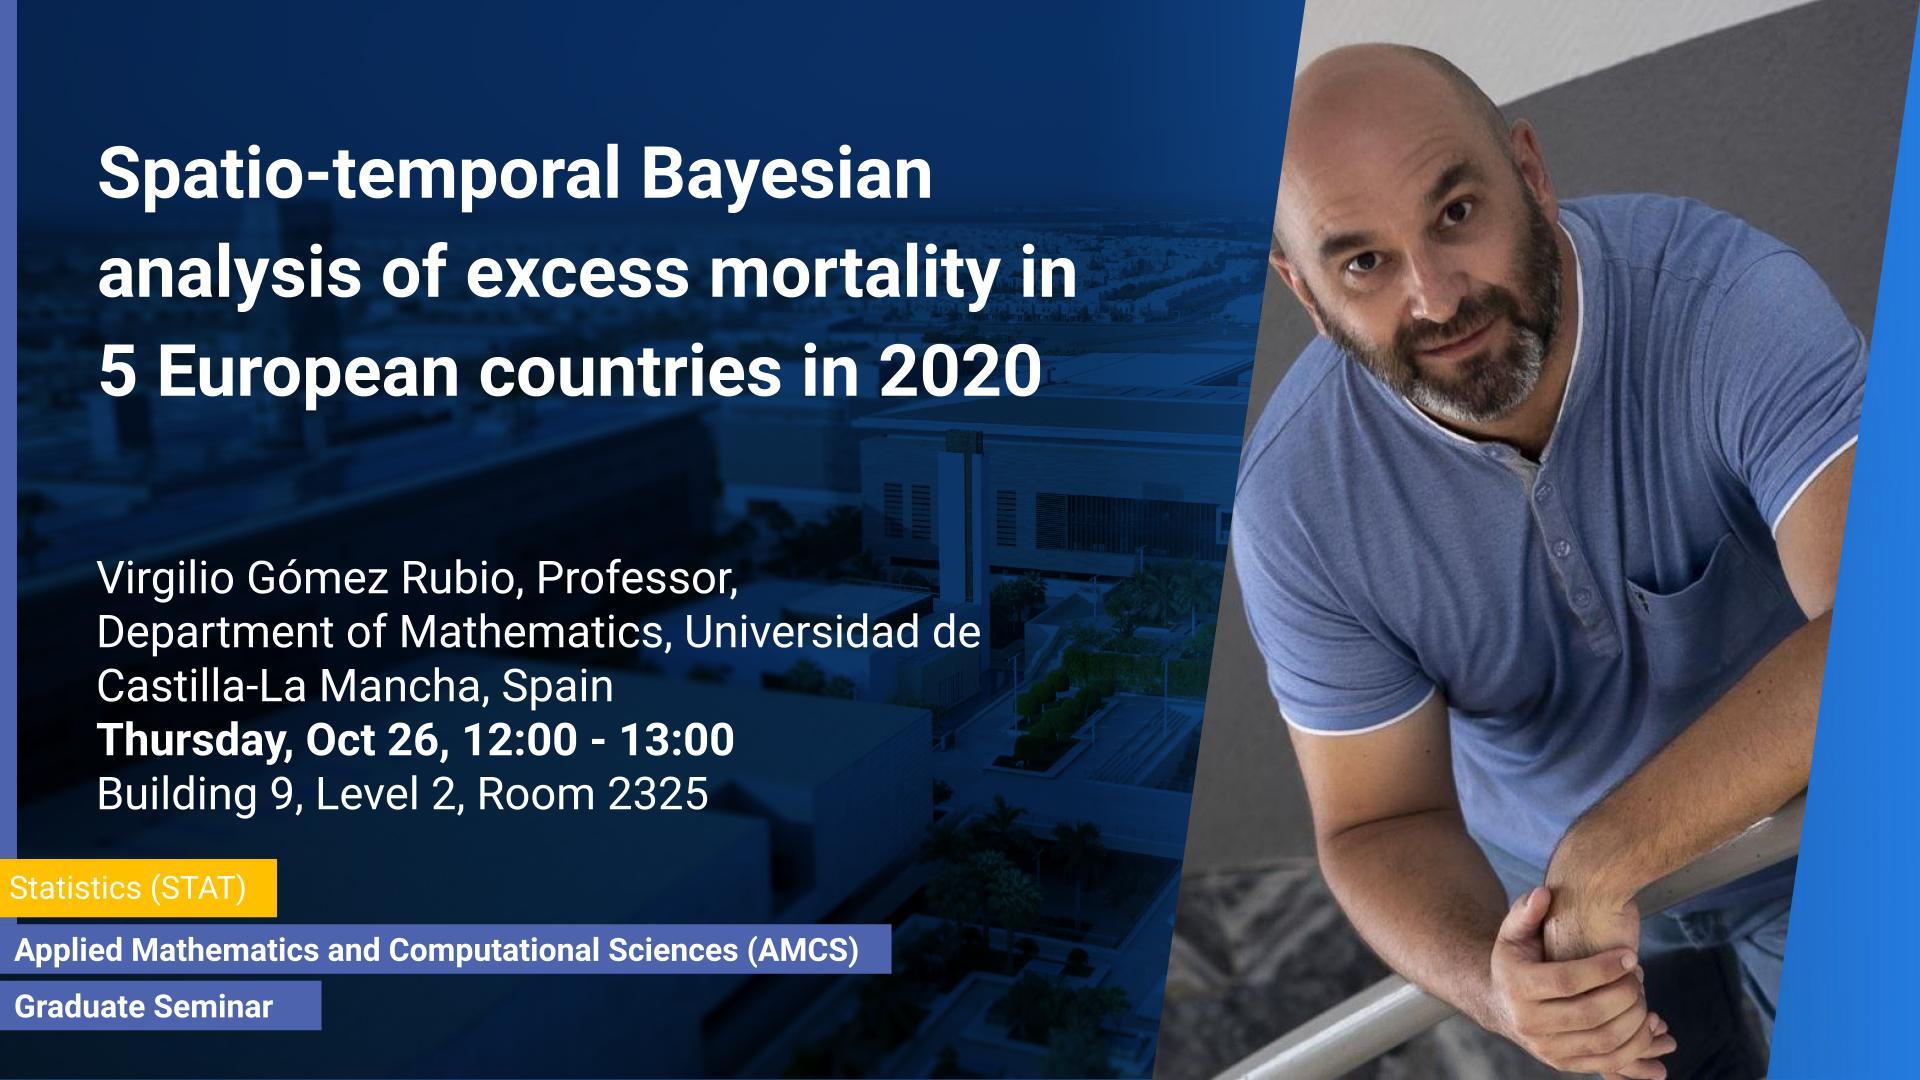 KAUST-CEMSE-AMCS-STAT-Graduate- Seminar- Virgilio- Gomez-Rubio- Spatio-temporal Bayesian analysis of excess mortality in 5 European countries in 2020